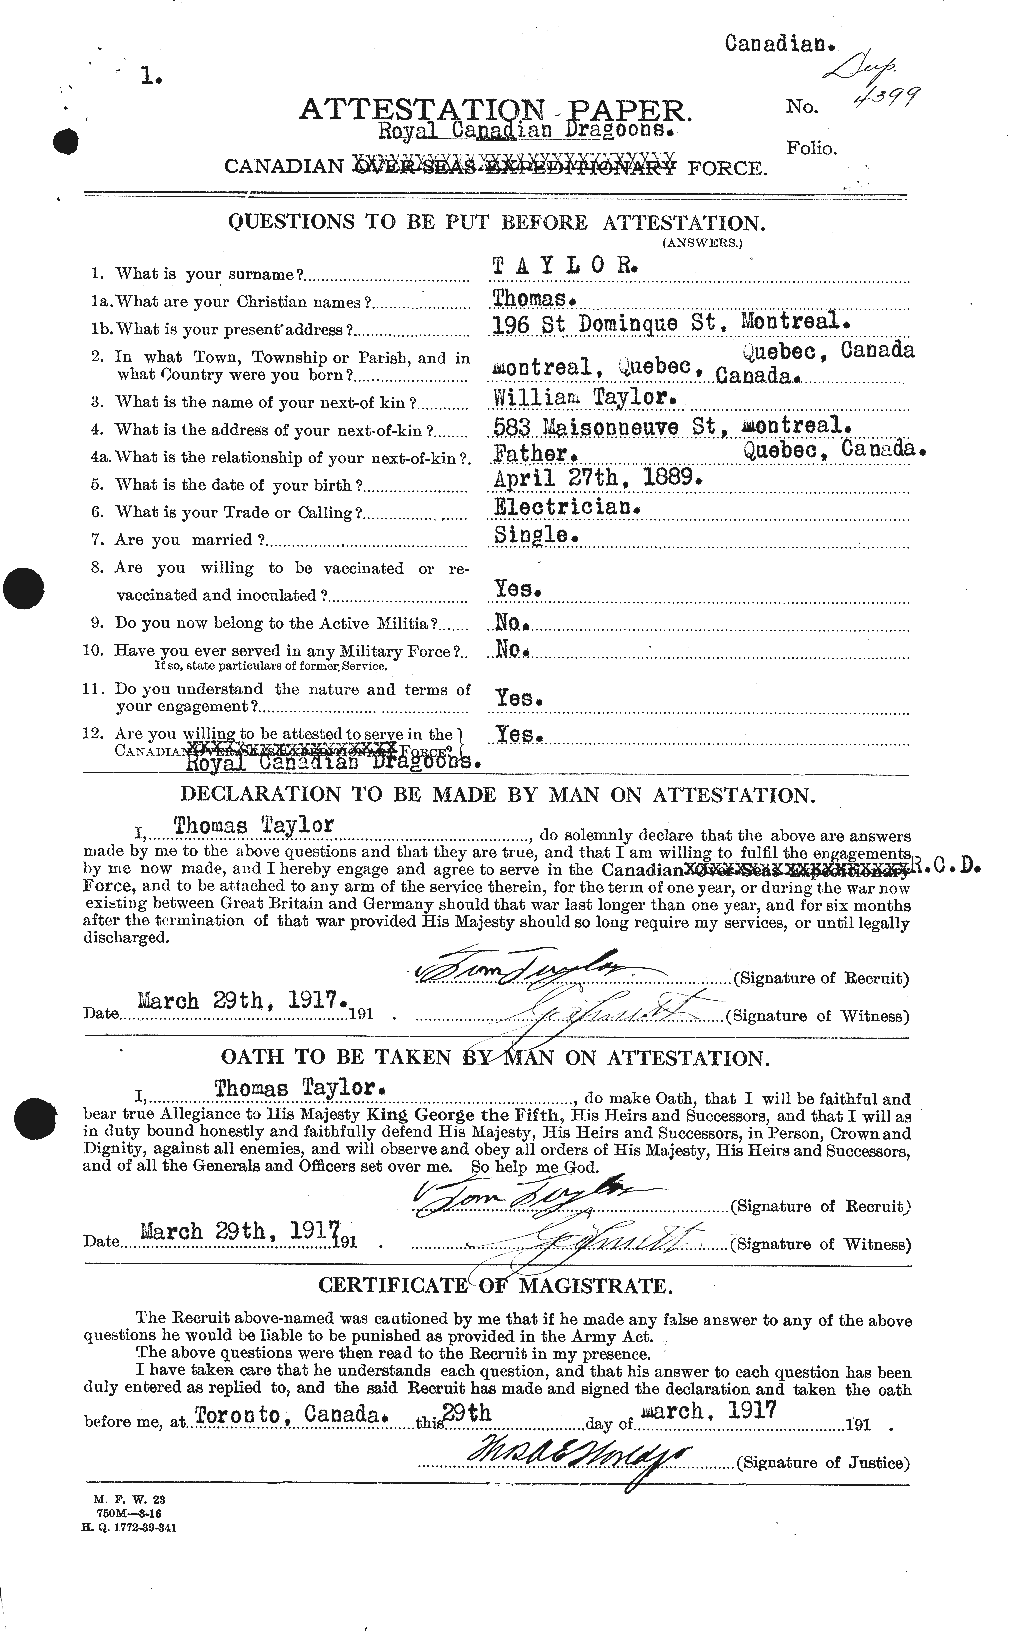 Personnel Records of the First World War - CEF 627963a